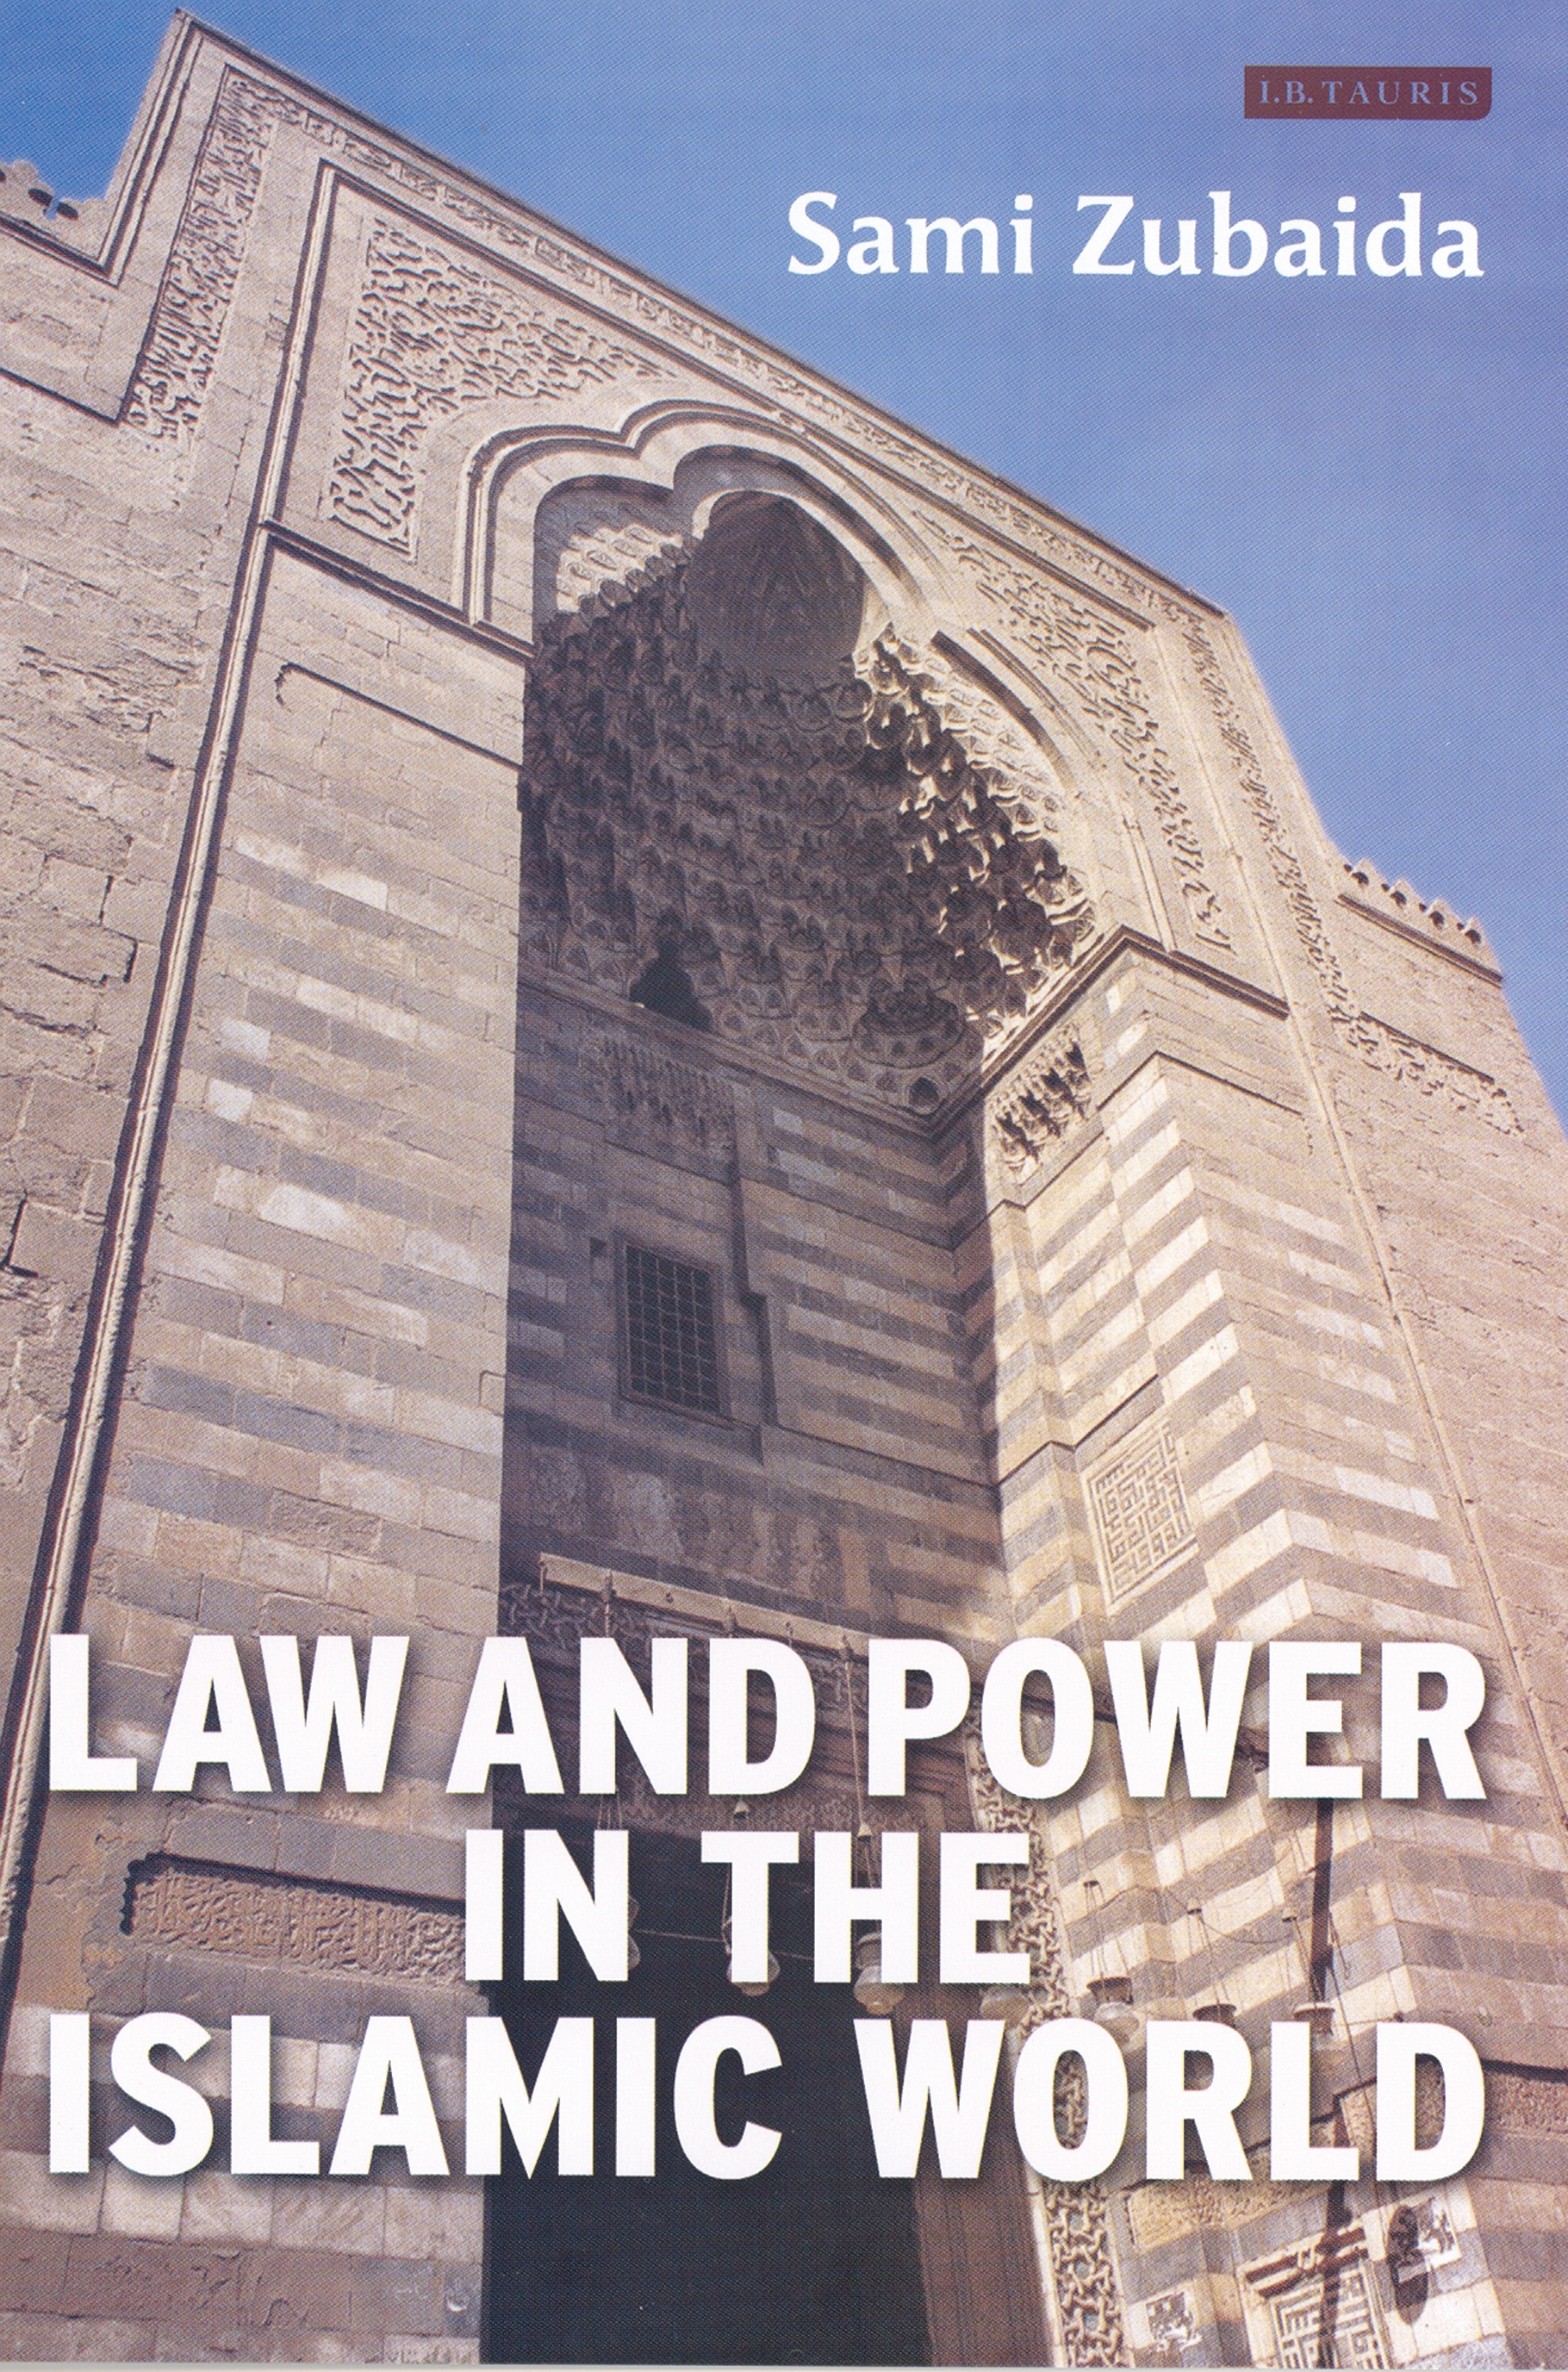 Law and Power in the Islamic World - 15-24.99